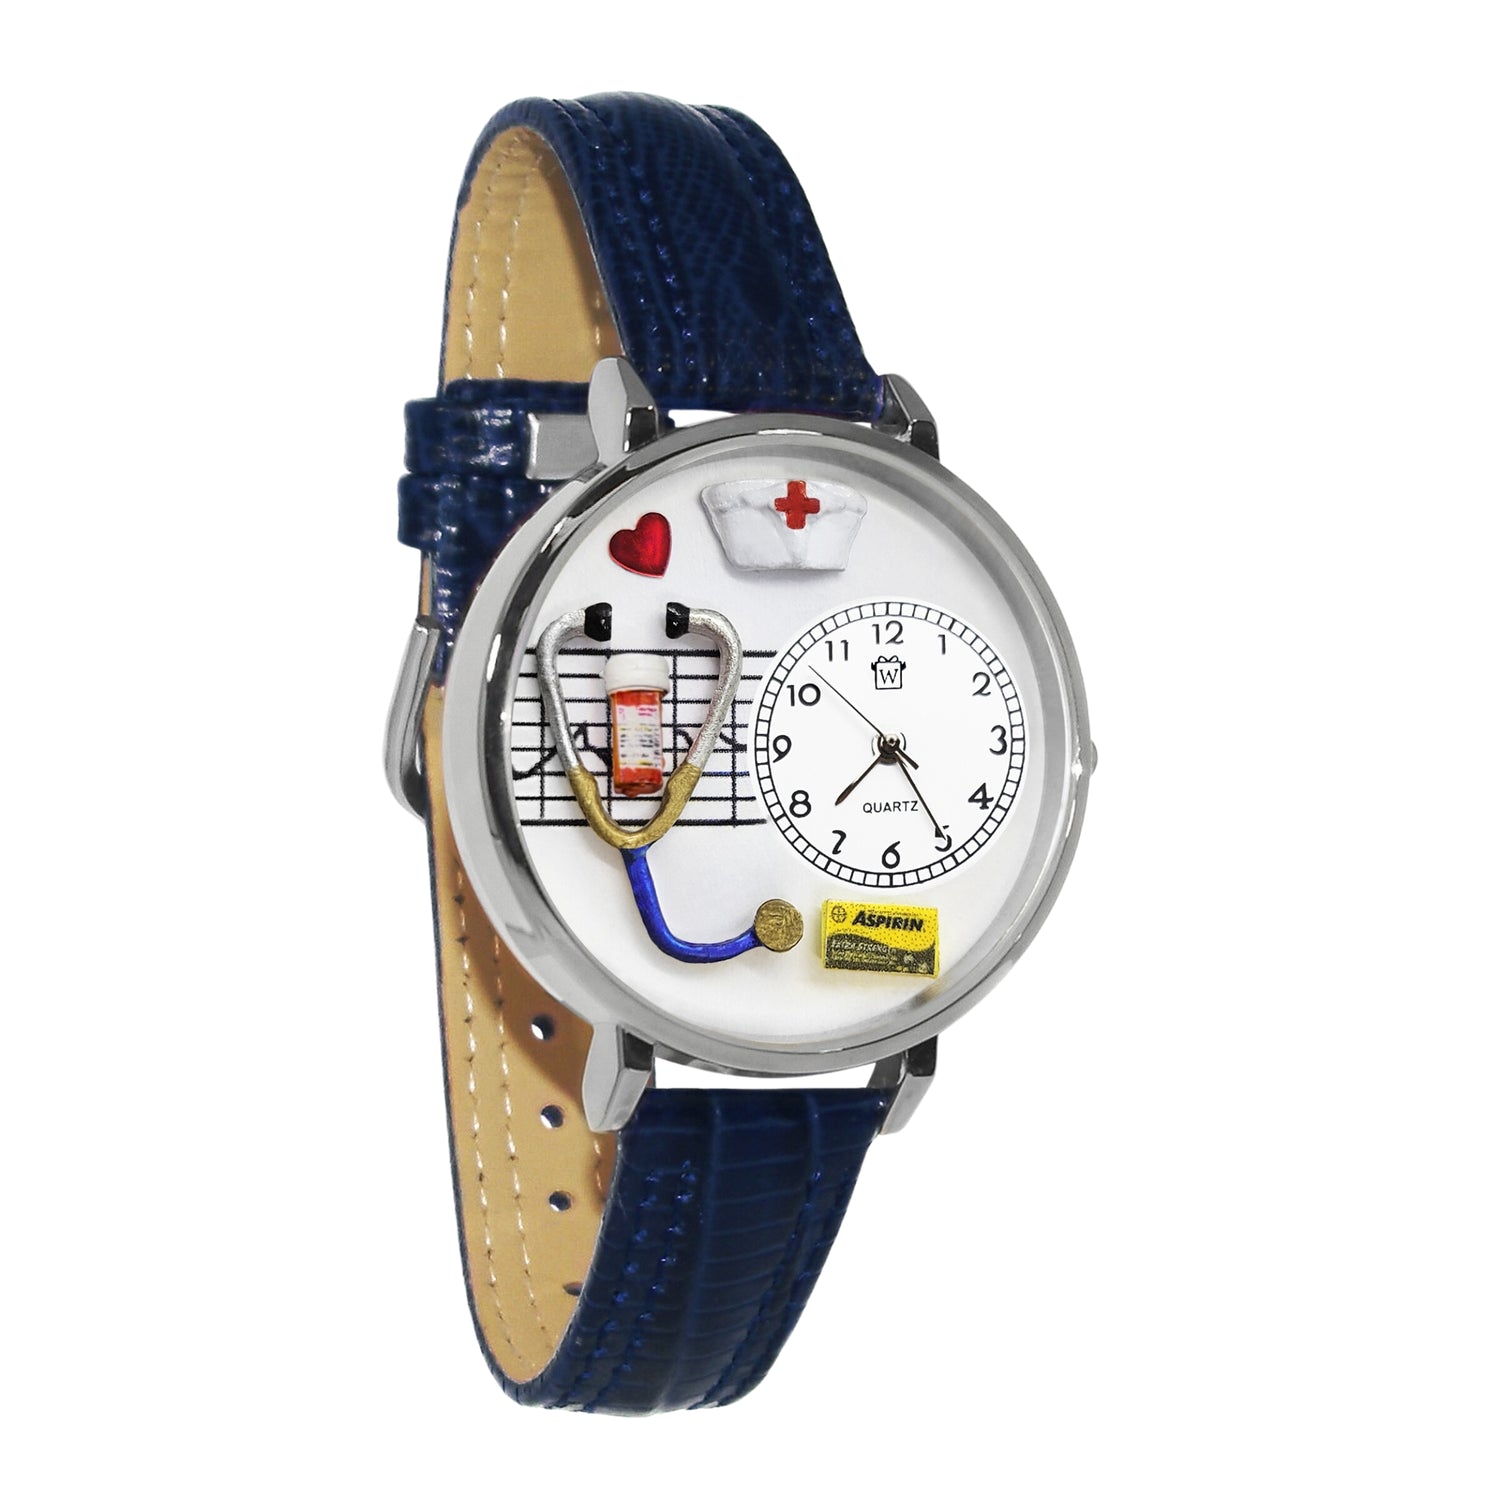 Whimsical Gifts | Nurse Red Cross 3D Watch Large Style | Handmade in USA | Professions Themed | Nurse | Novelty Unique Fun Miniatures Gift | Silver Finish Navy Blue Leather Watch Band